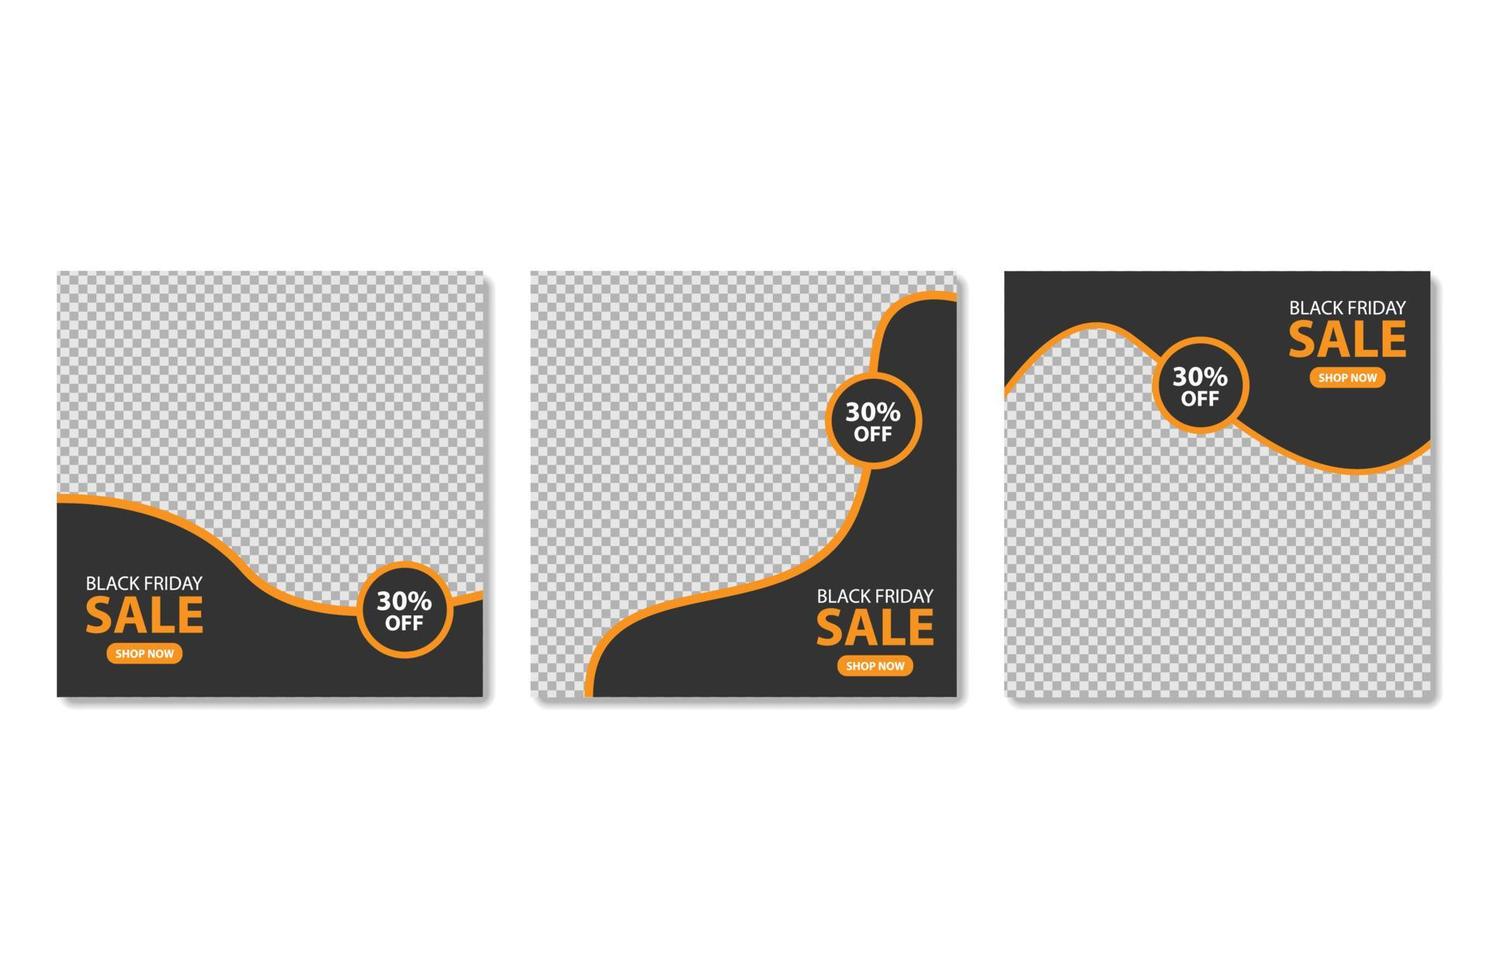 Set of editable minimal square banner template. Black and orange background color with shape. Suitable for social media post and web ads. Vector illustration